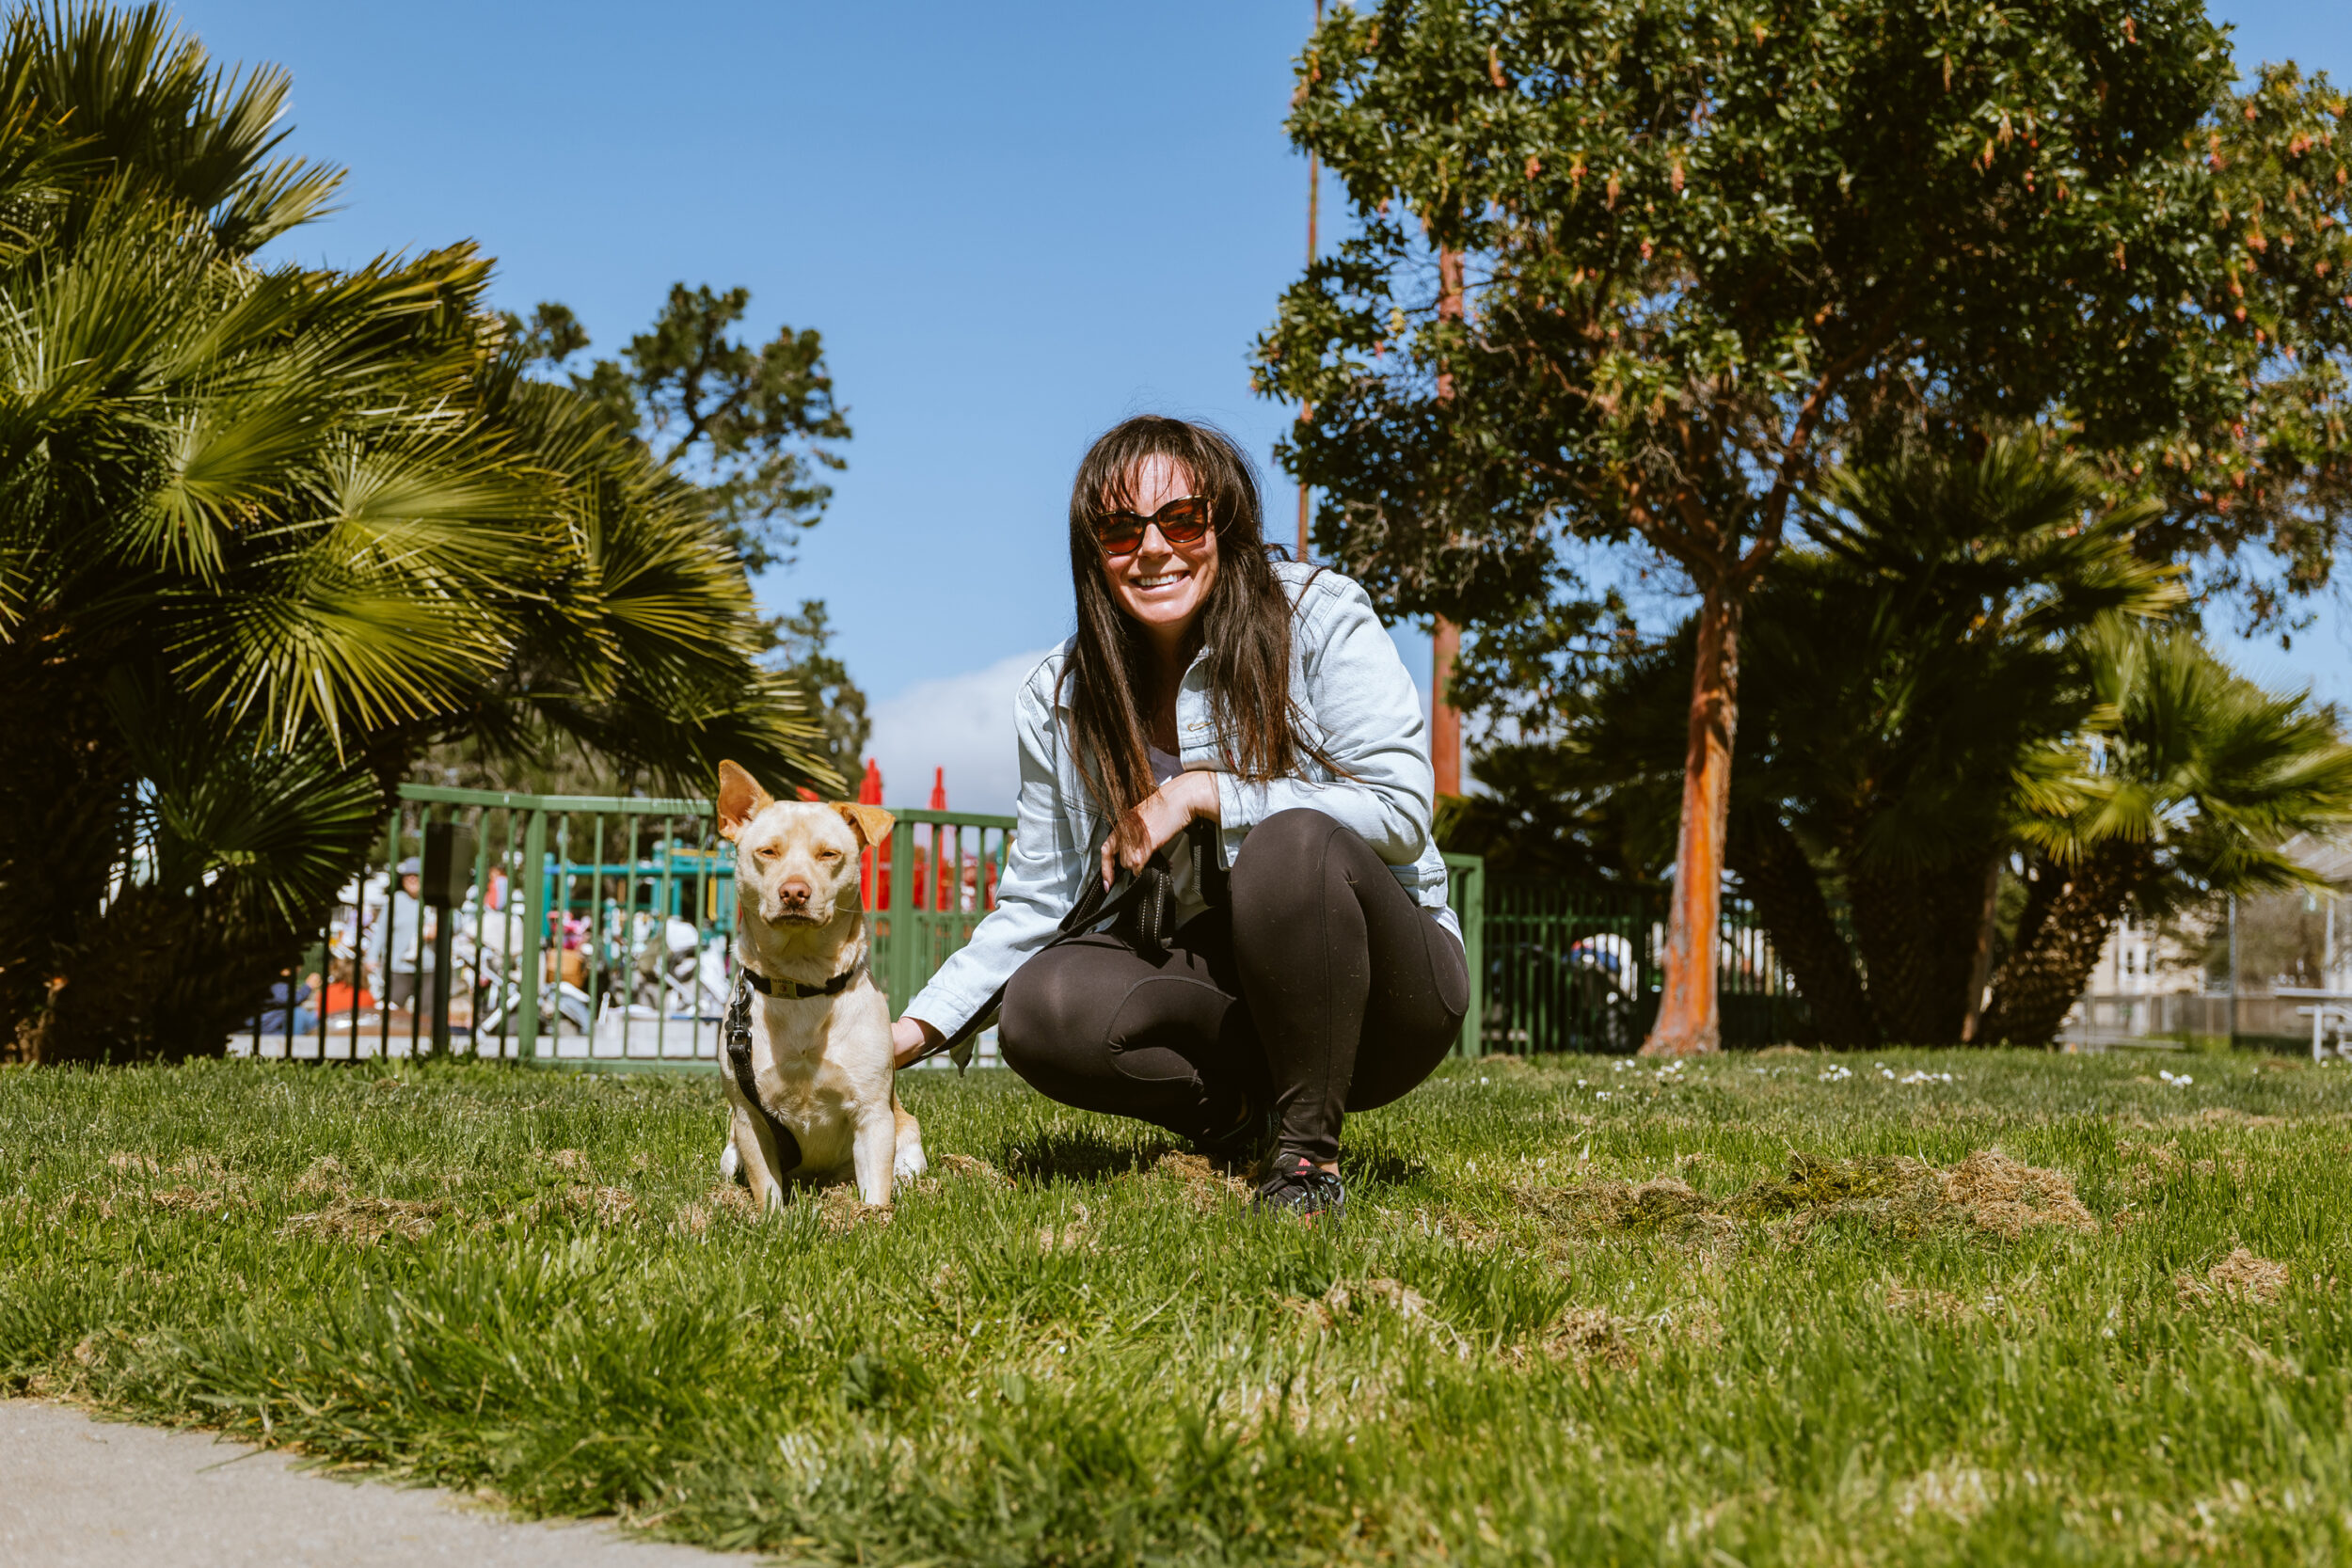 A woman and a dog pose together on sunny grass, with trees and a playground in the background.